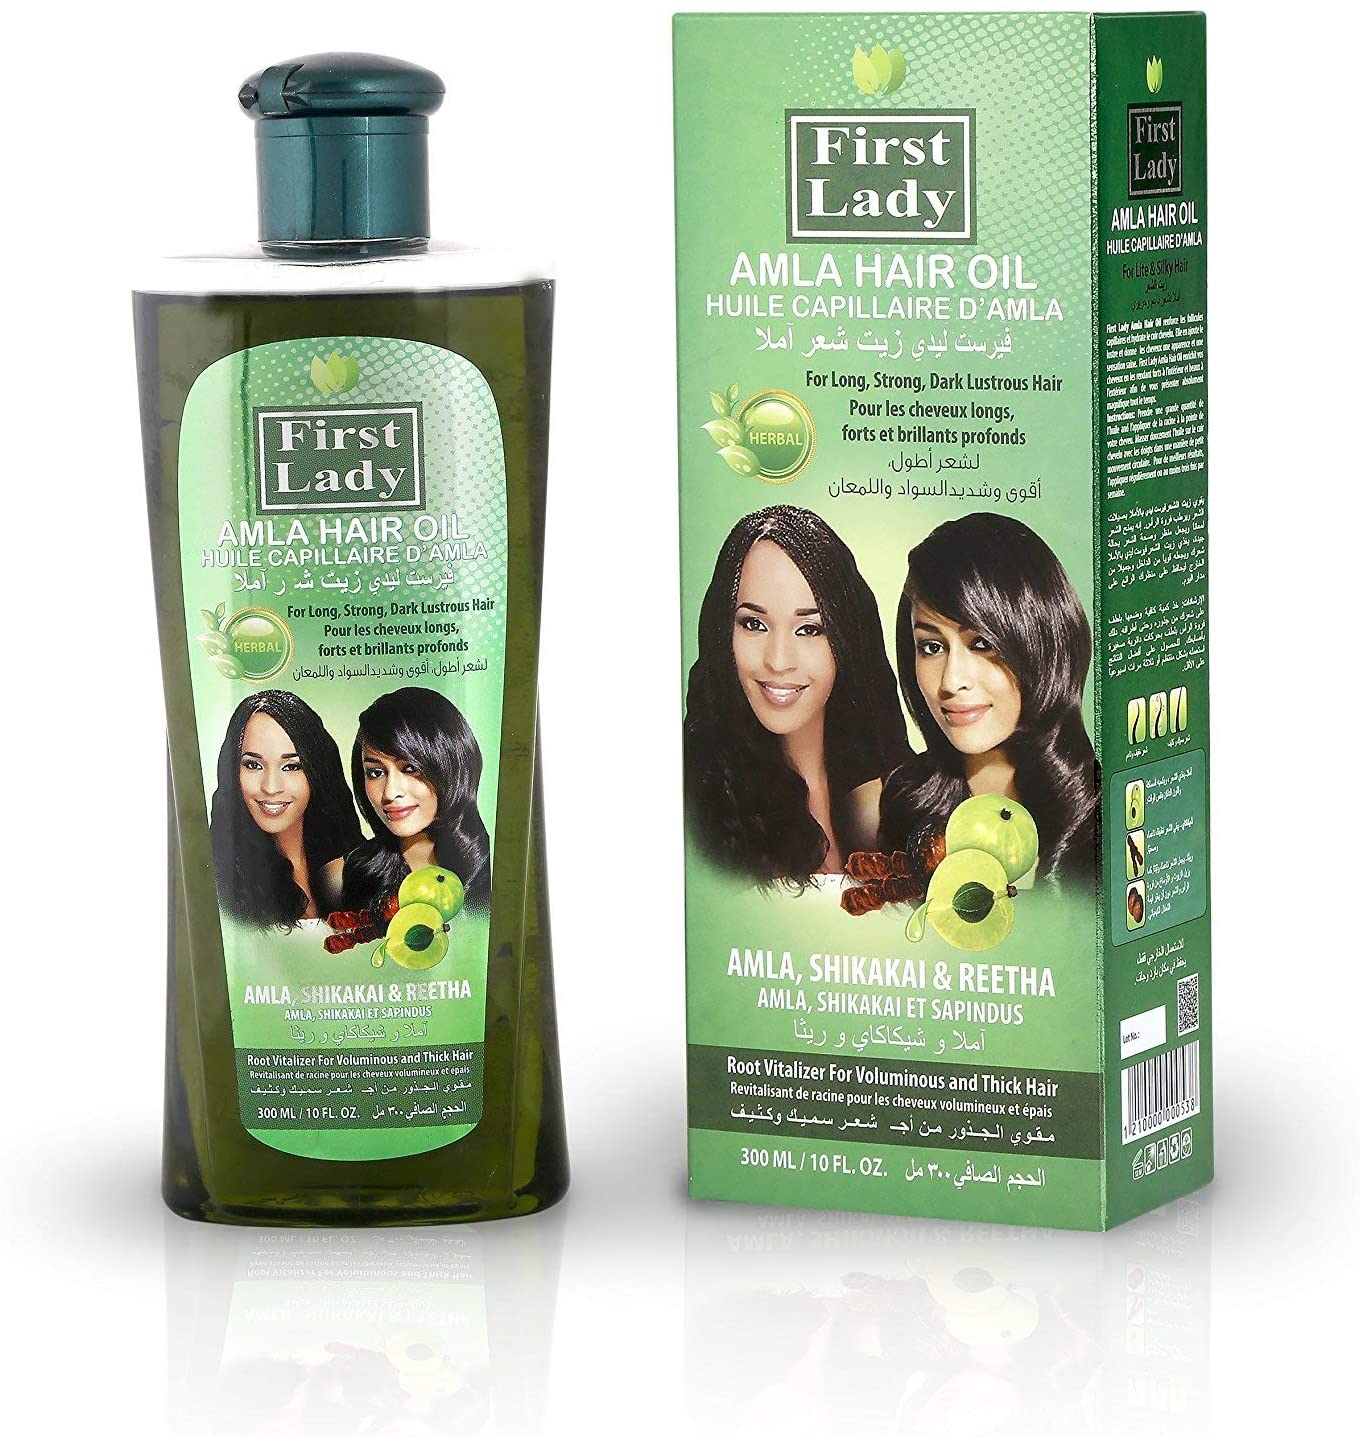 First Lady Amla Hair Oil strengthens the hair follicles, moisturises the scalp, strengthens and nourishes hair.